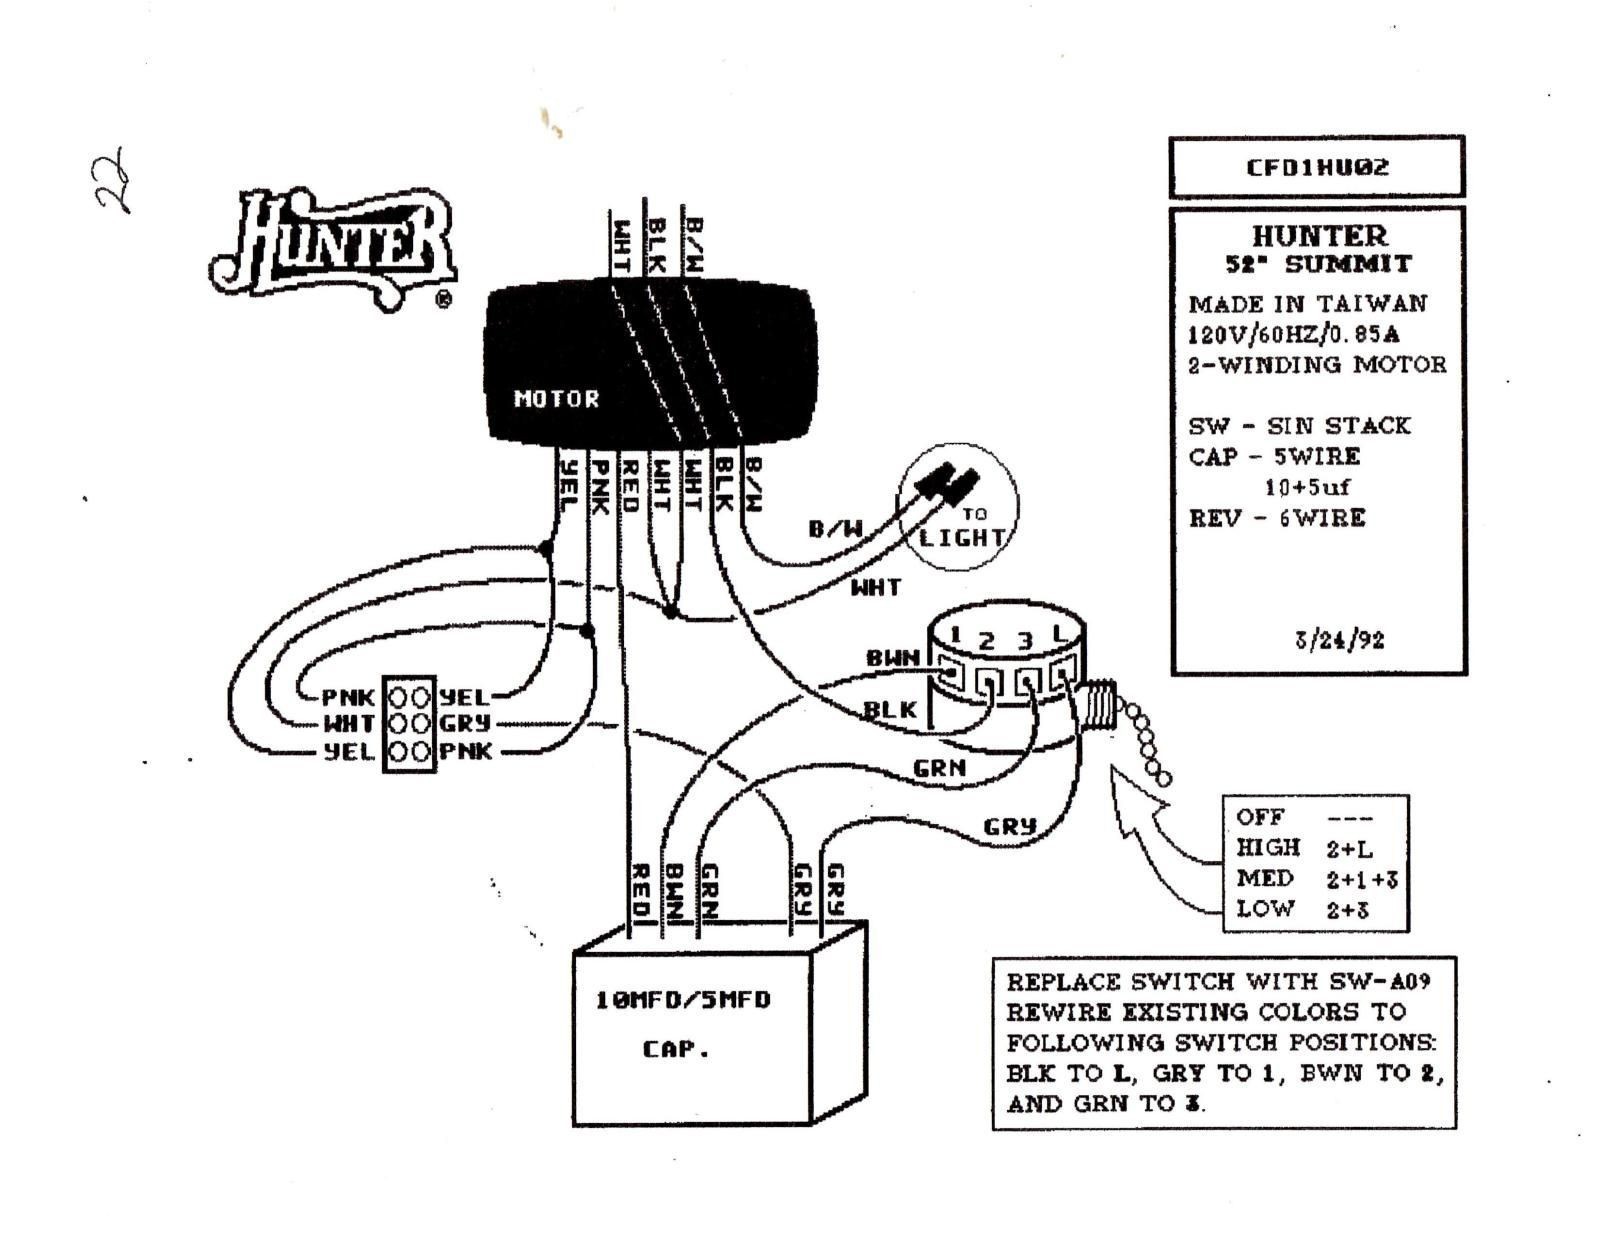 Wiring Diagram for Ceiling Fan Light Kit Save Fan Speed Switch Wiring Diagram Hunter Ceiling Fan